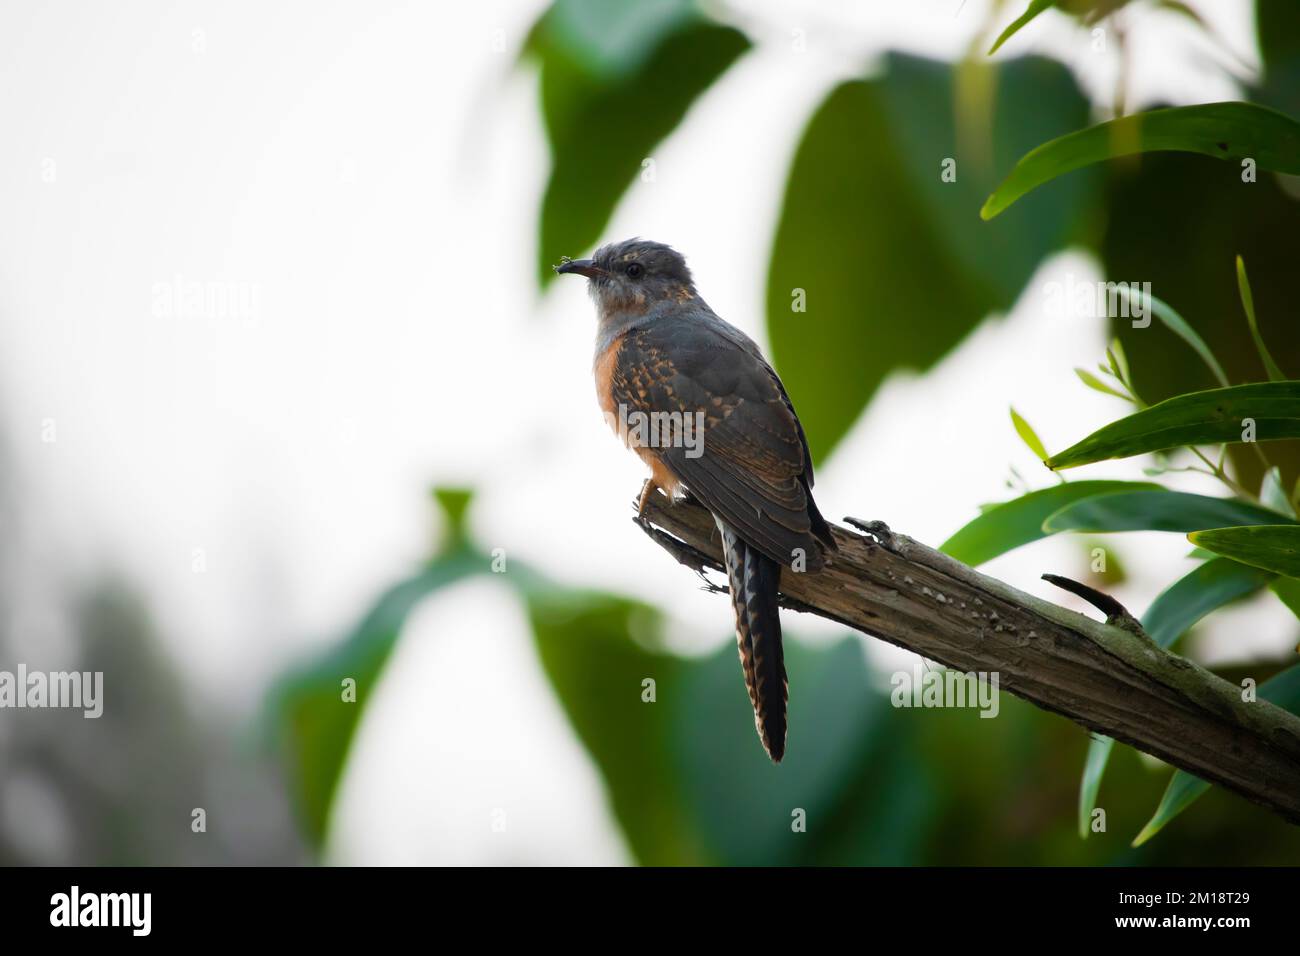 A Common cuckoo bird sit in a tree branch, This species is a widespread summer migrant to Europe and Asia, and winters in Africa. Stock Photo